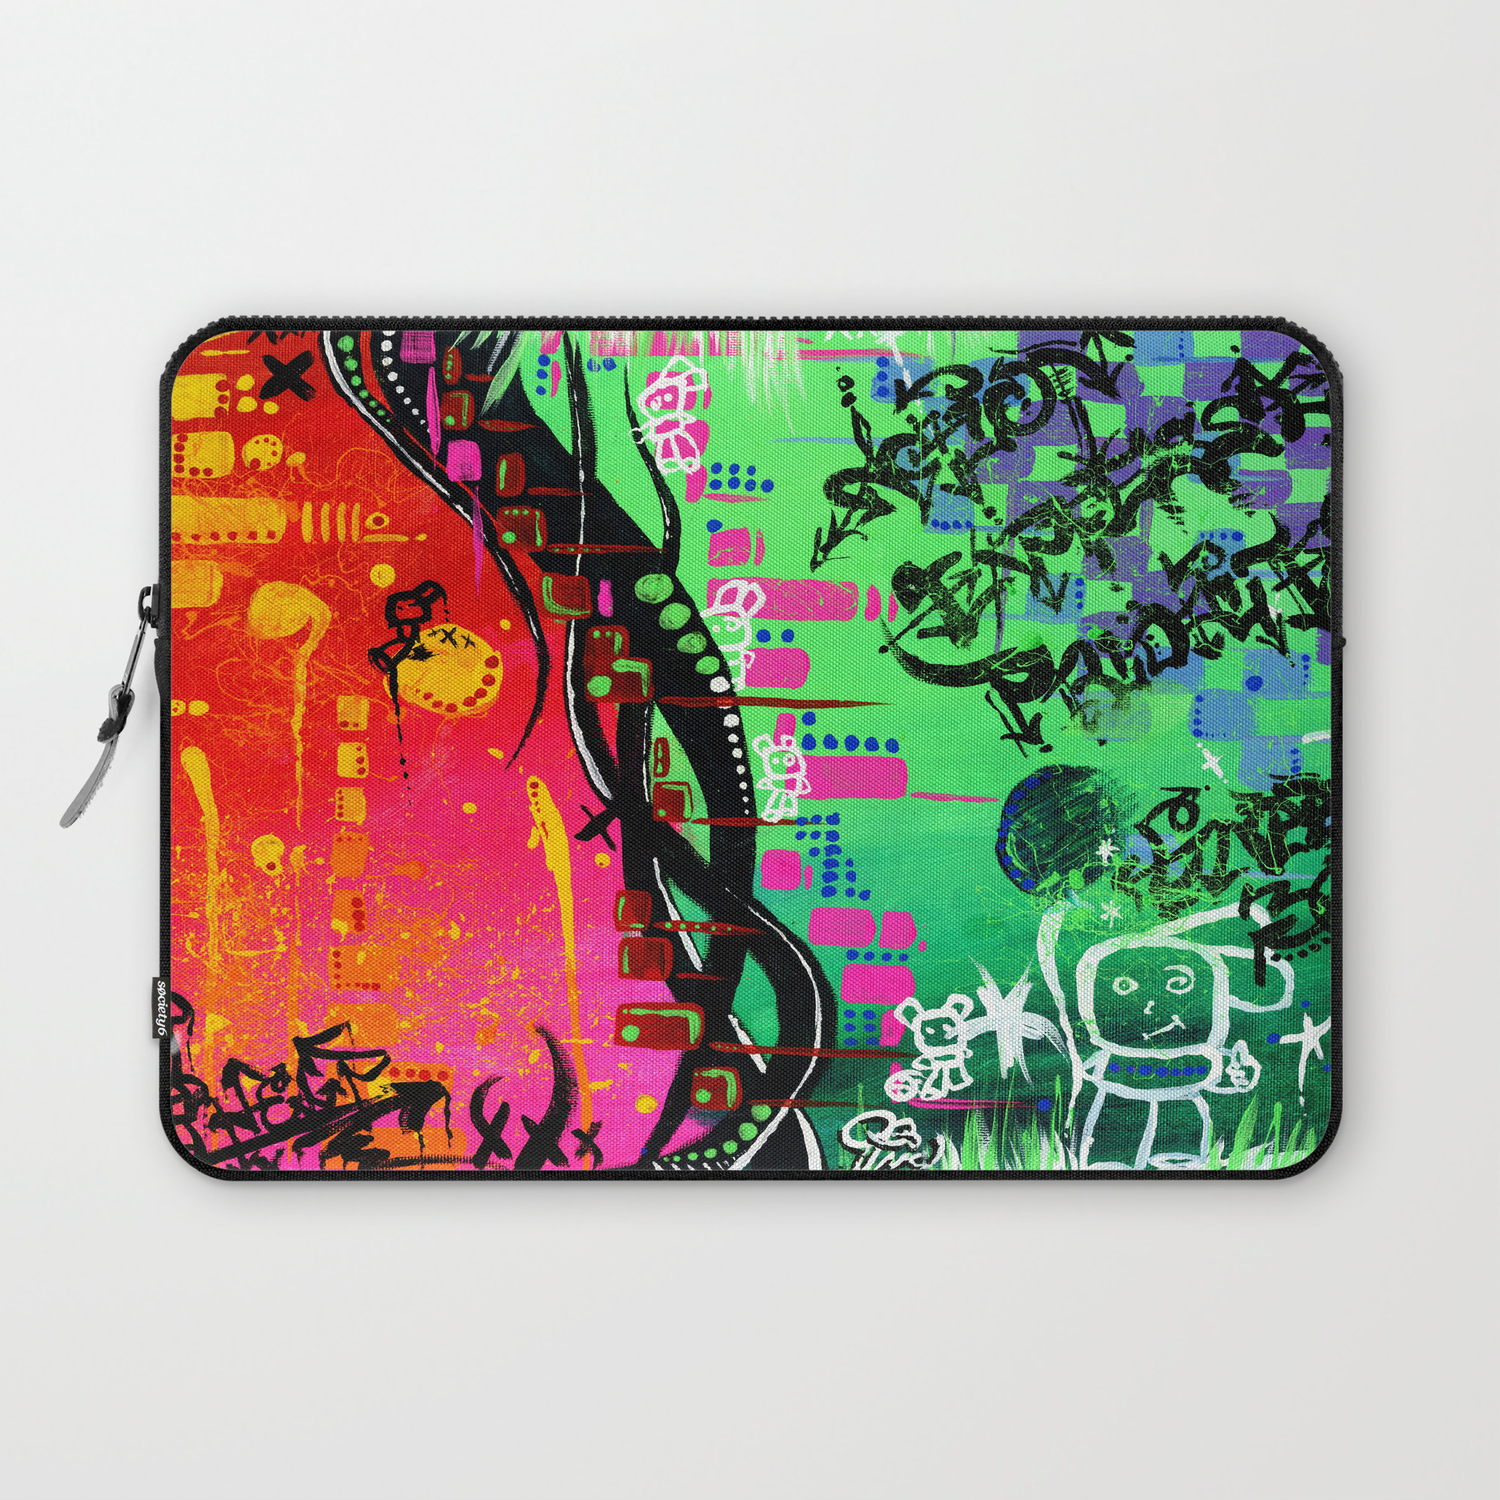 overspringen insect commando ACTION EXPRESSES PRIORITIES” Laptop Sleeve by Sababa Surf | Society6